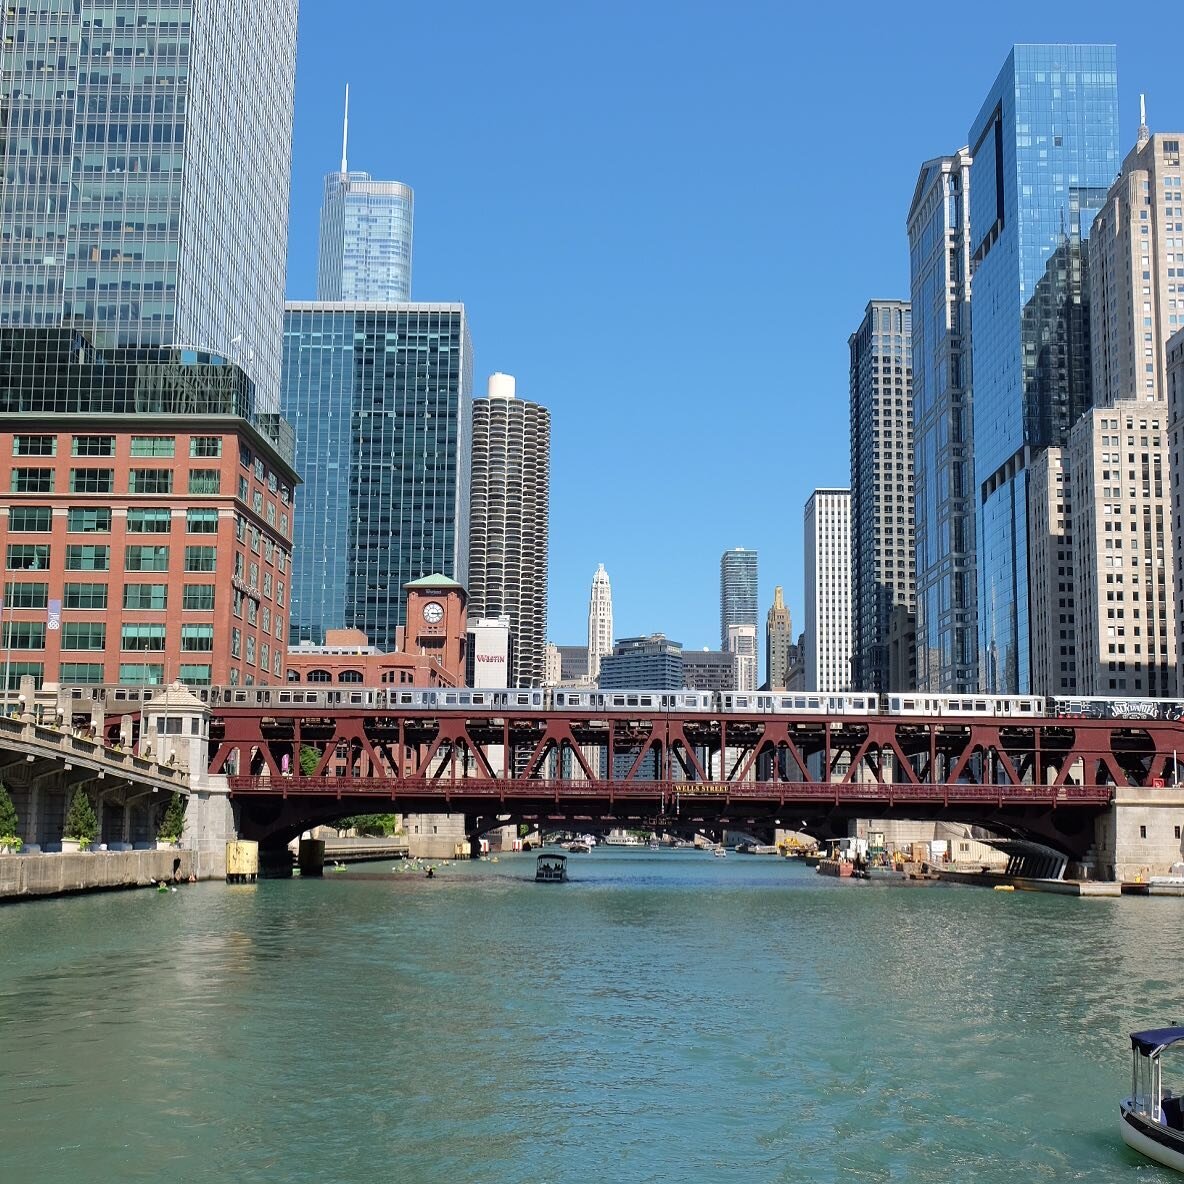 Chicago has something for everyone. Check out my favorite things to do in the Windy City! Link in bio. 🍕⚾️ #roadjesstravels #chicago #windycity #chicagoriverwalk #travel